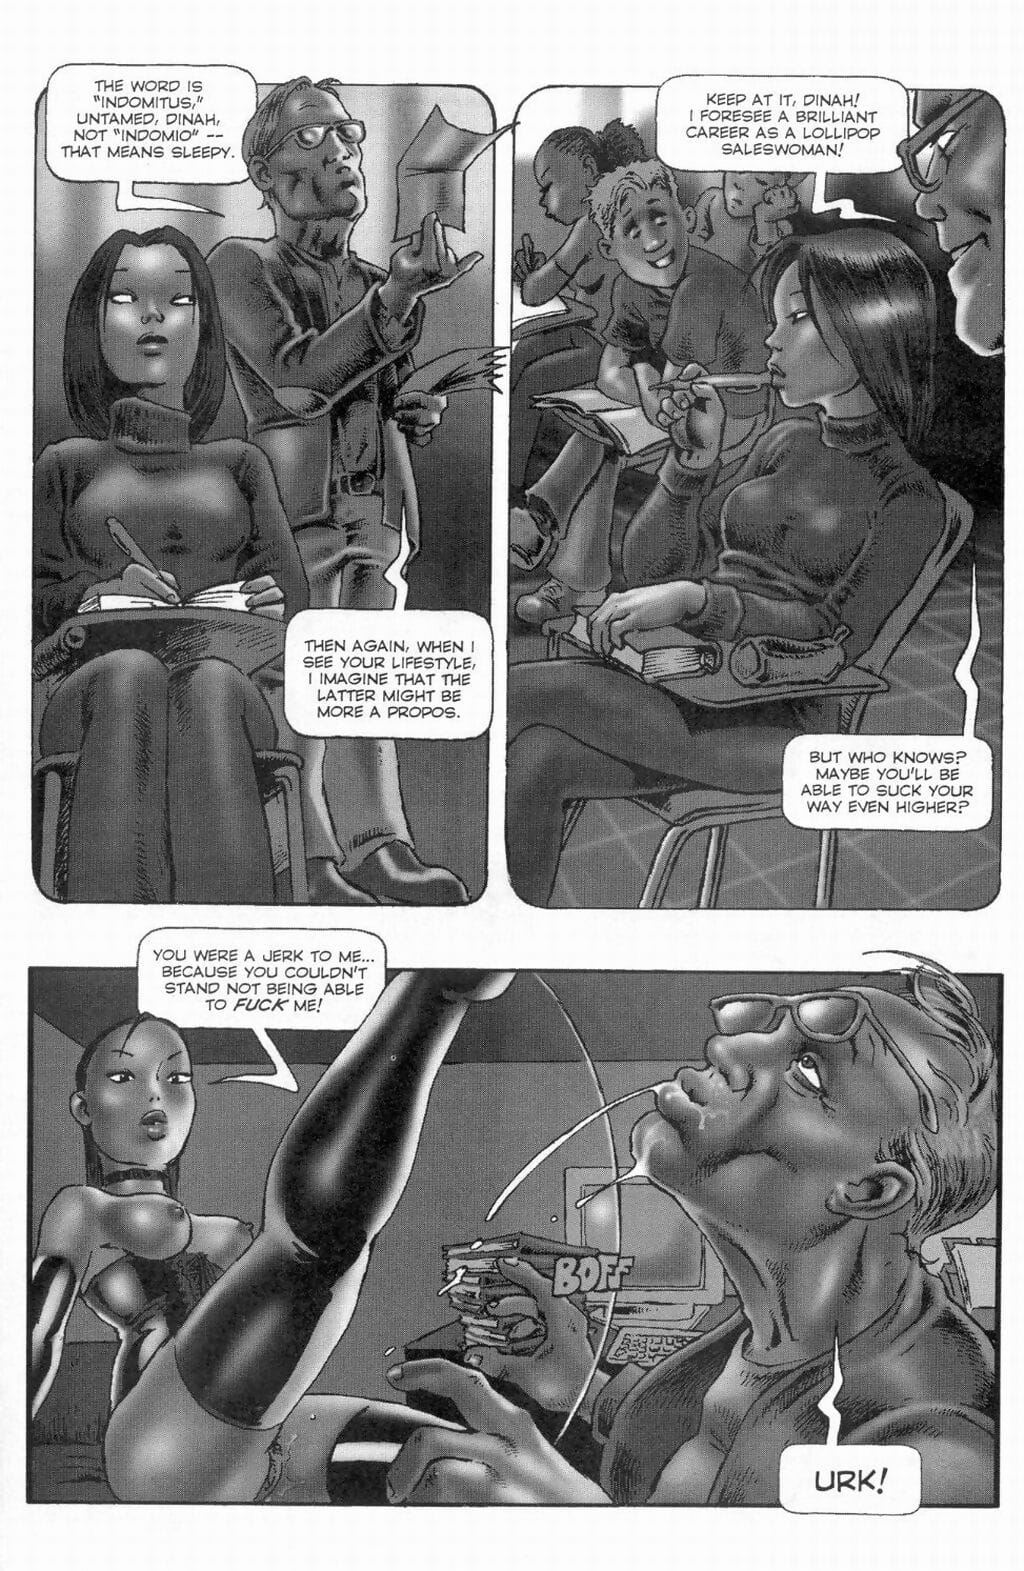 Alraune #6 page 1